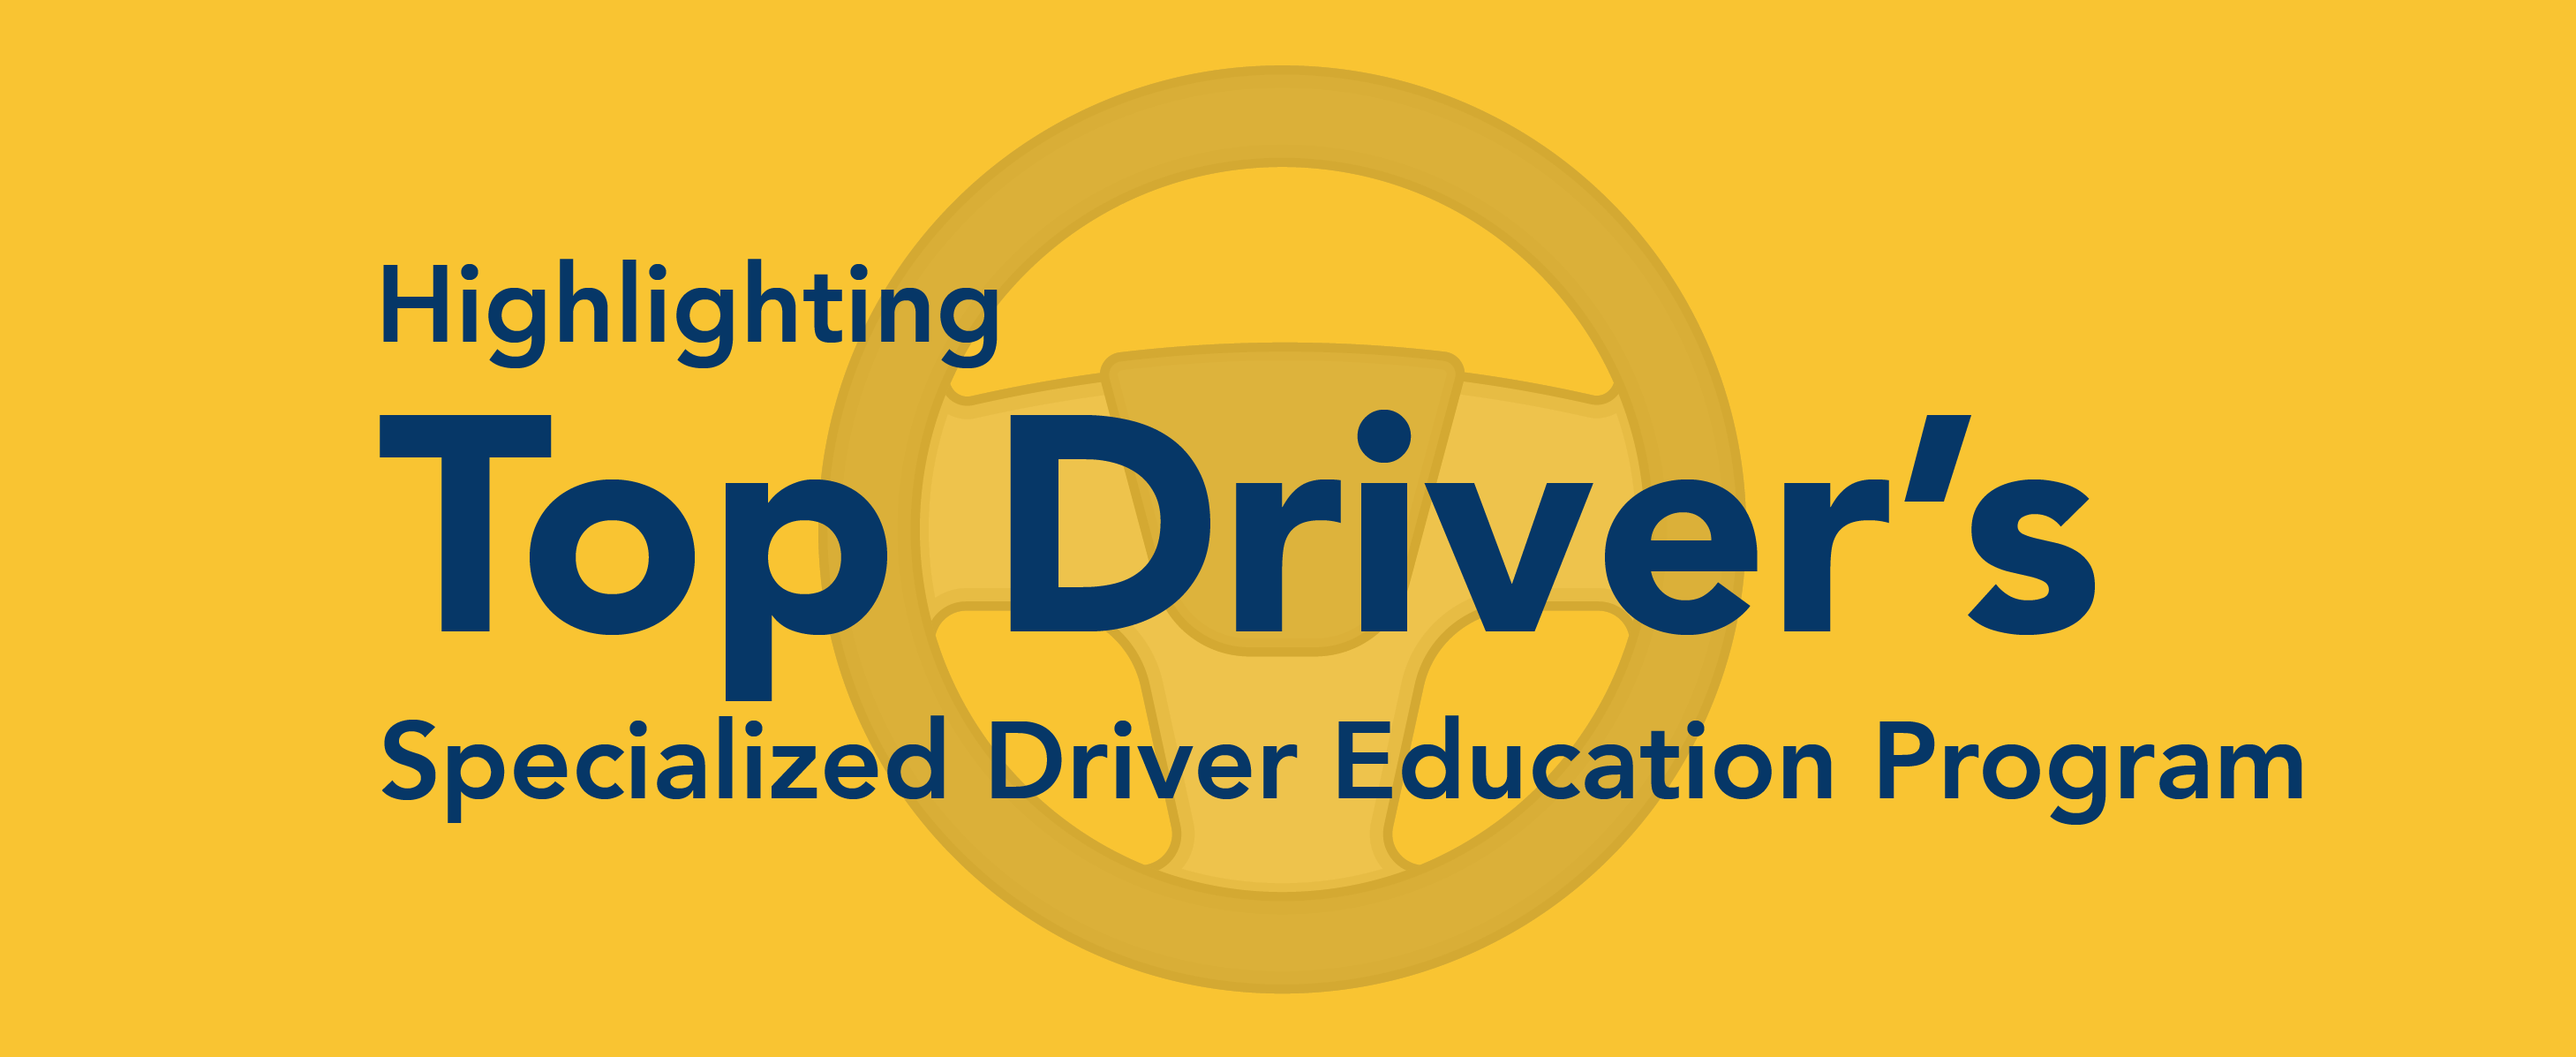 Highlighting Top Driver's specialized driver education program.